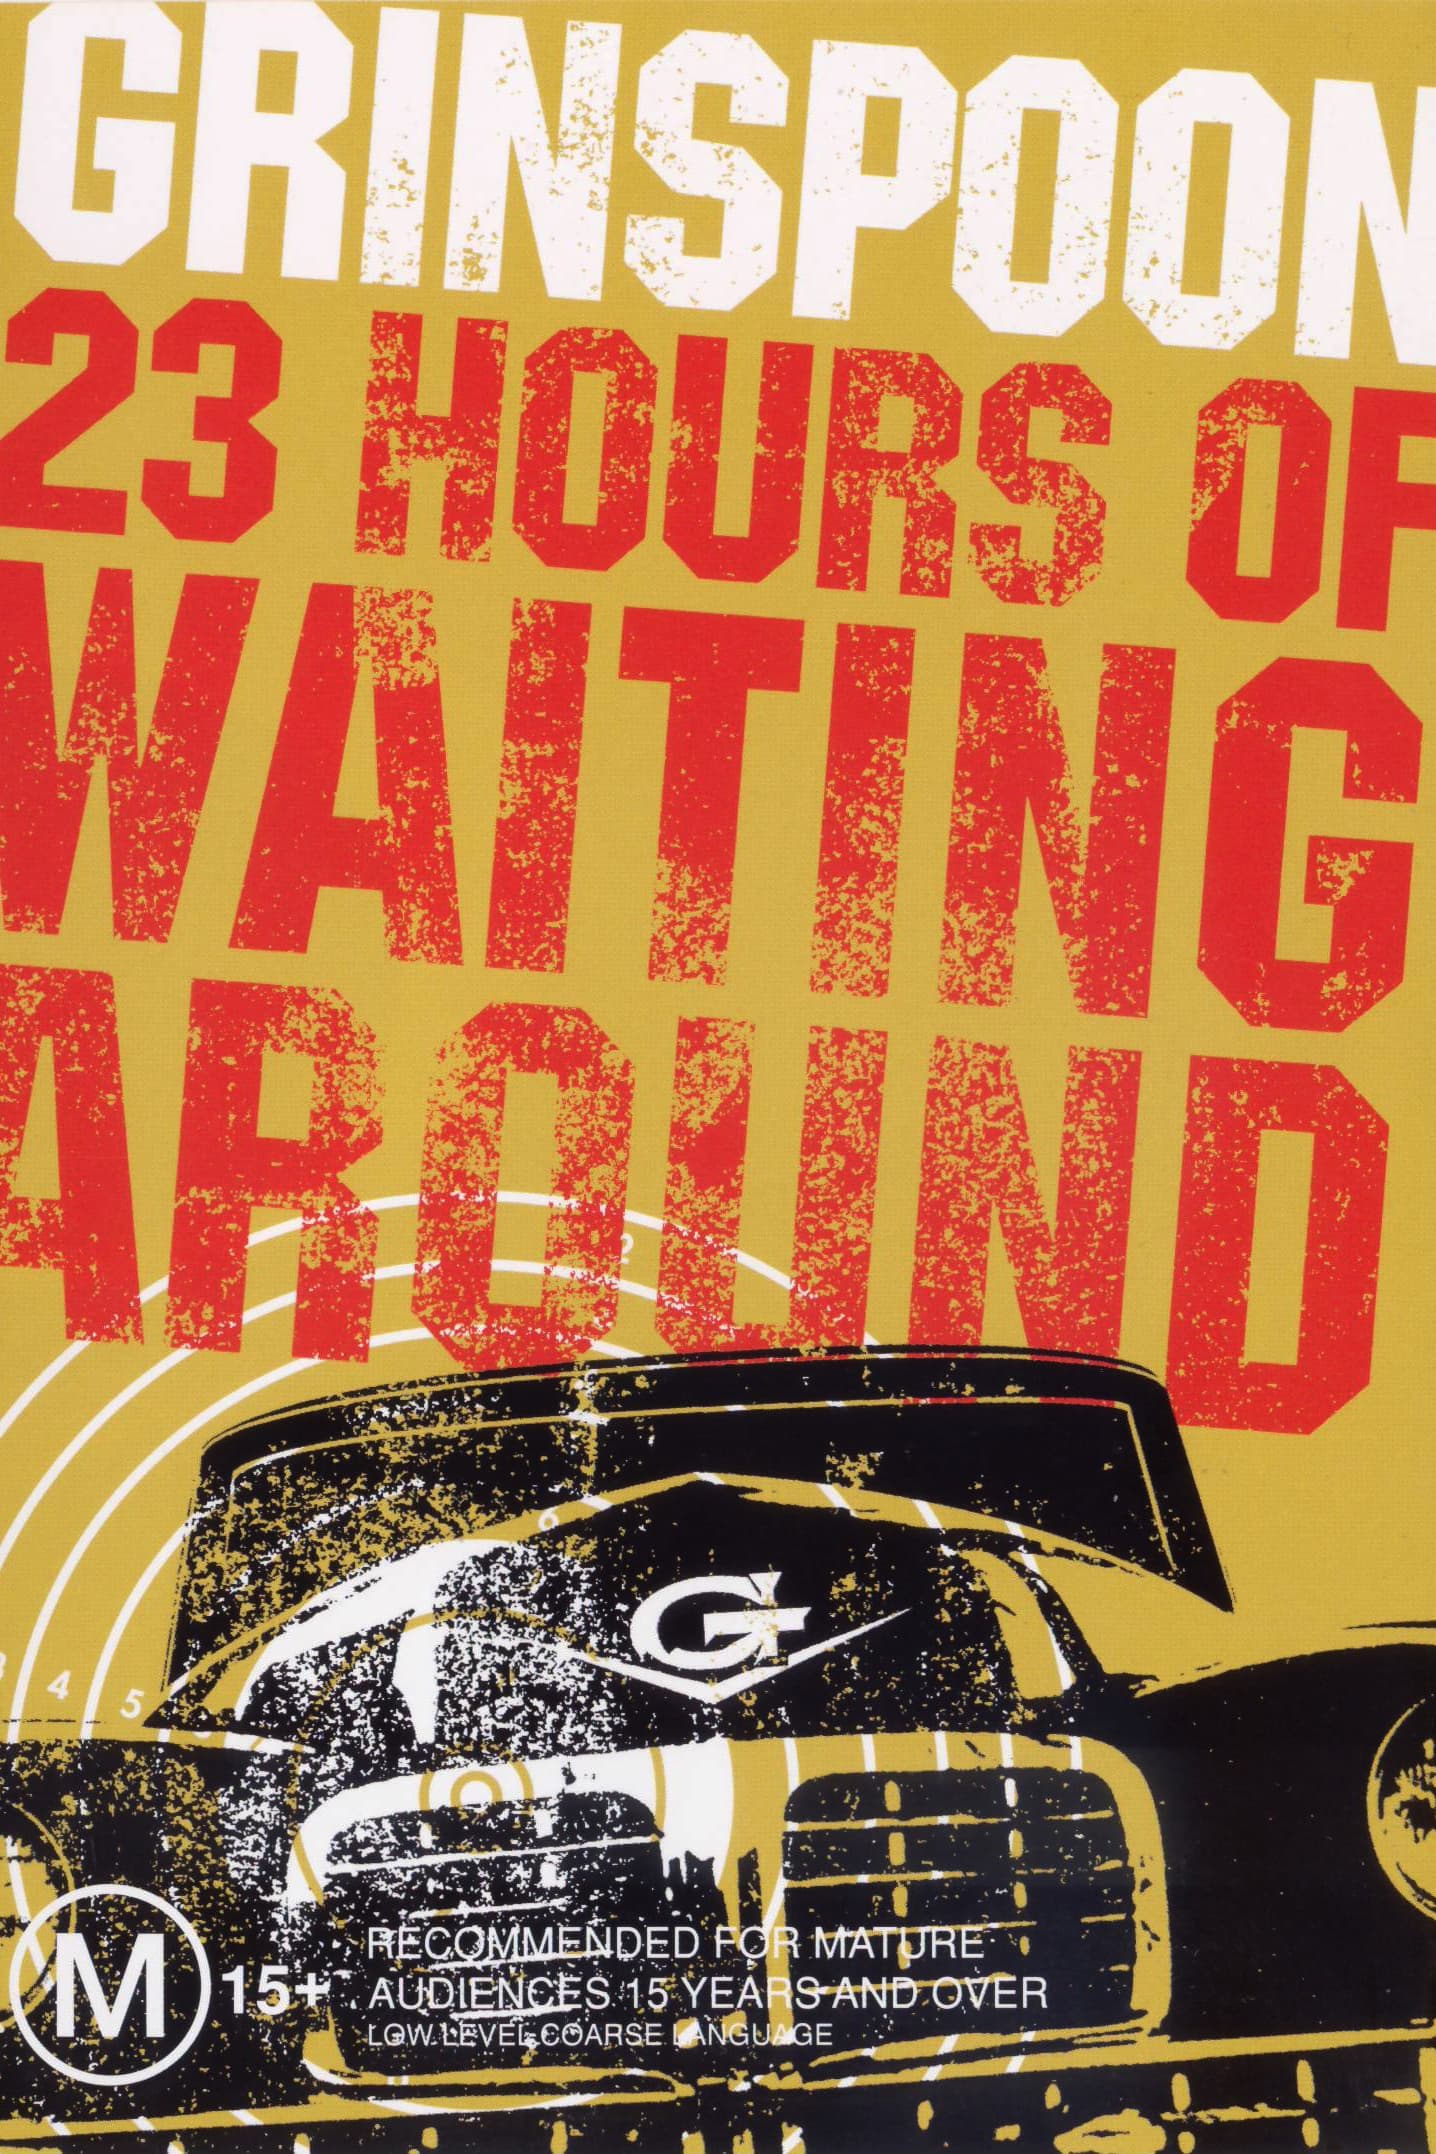 Grinspoon: 23 Hours of Waiting Around